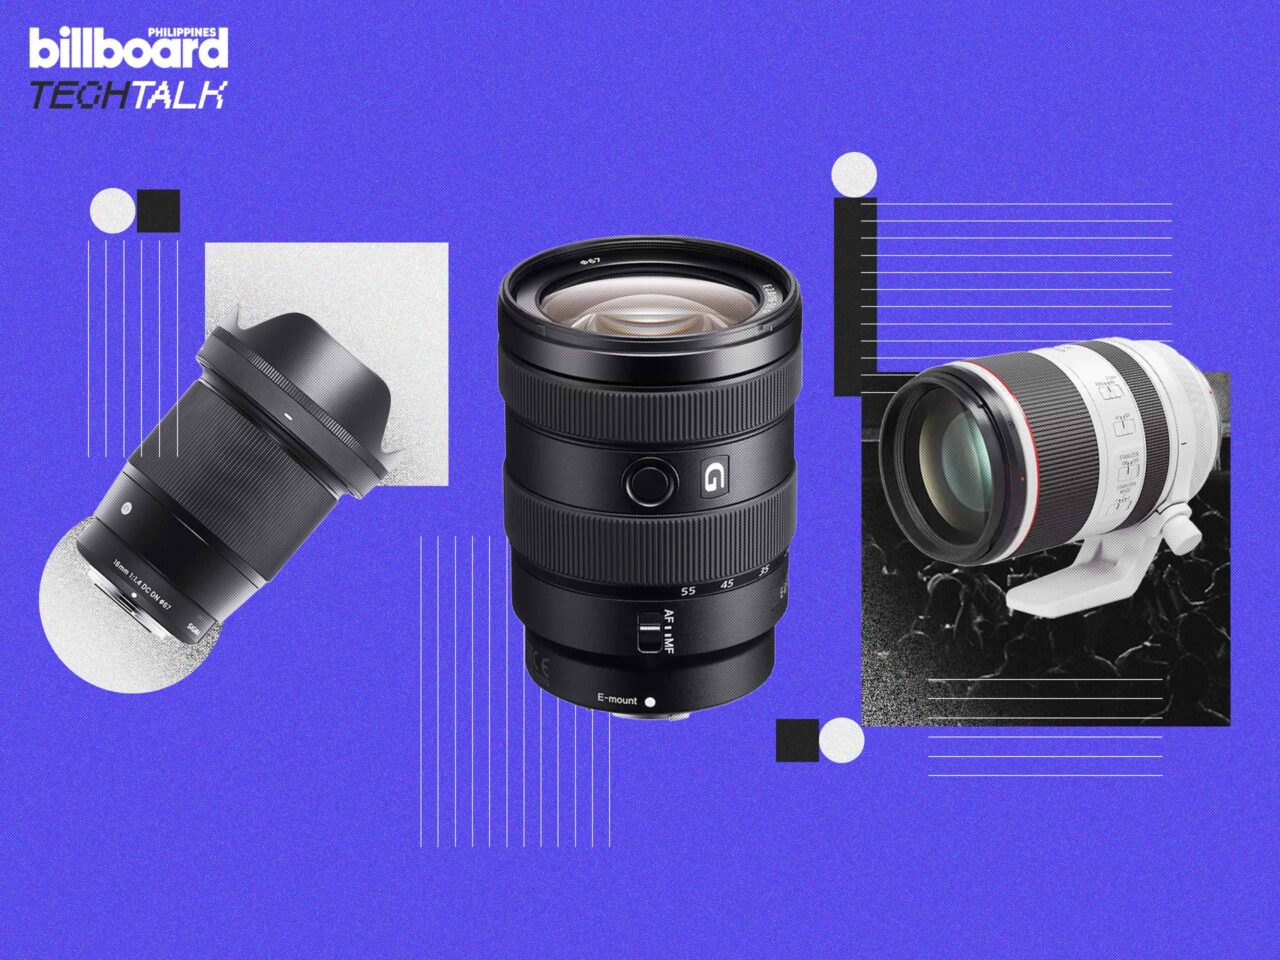 These are the best camera lenses you need when doing concert photography, as recommended by Billboard Philippines.